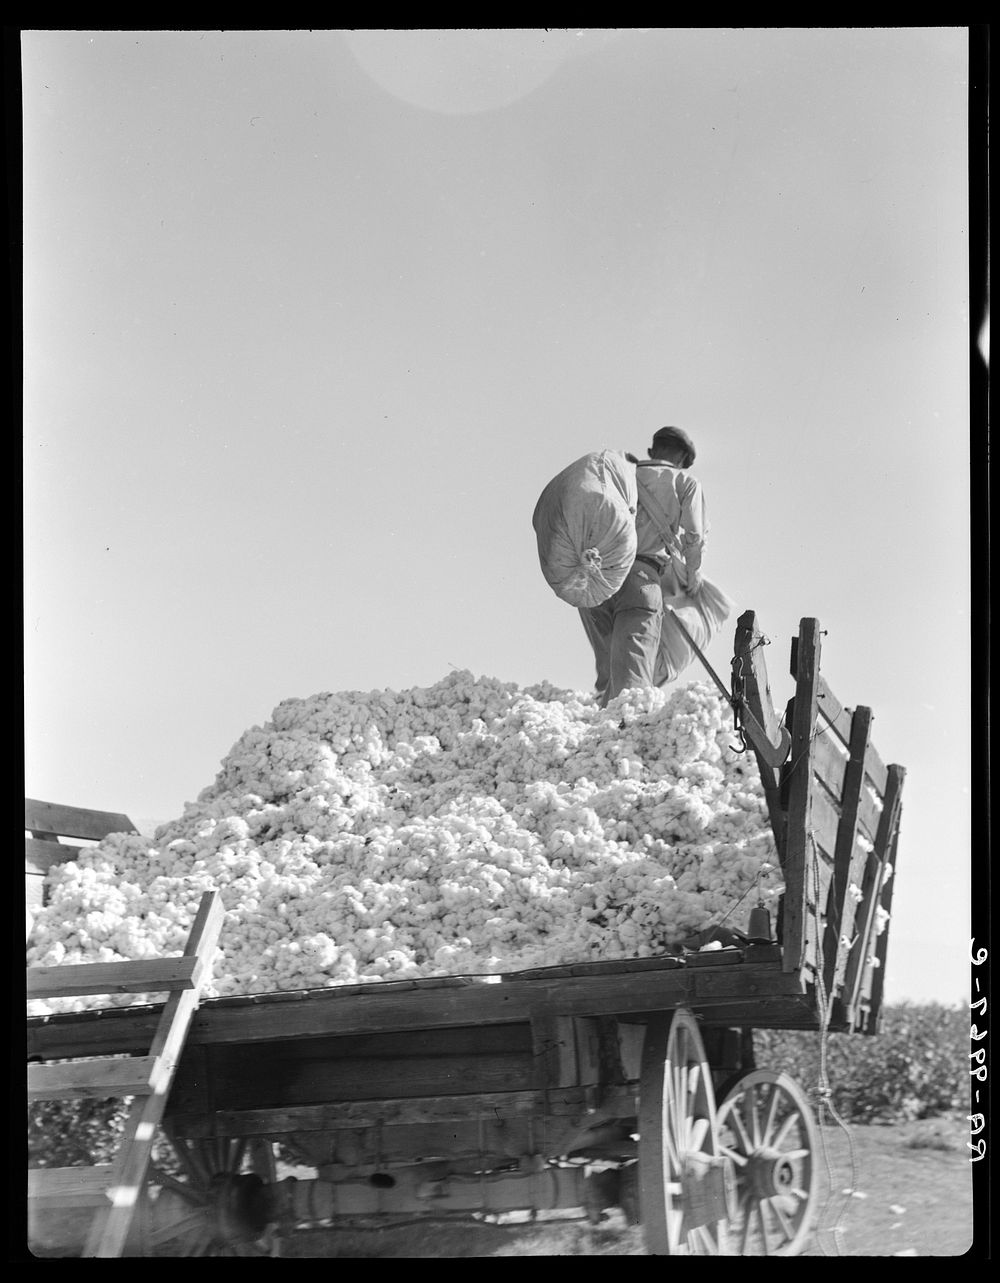 Loading cotton. Southern San Joaquin Valley, California. Sourced from the Library of Congress.